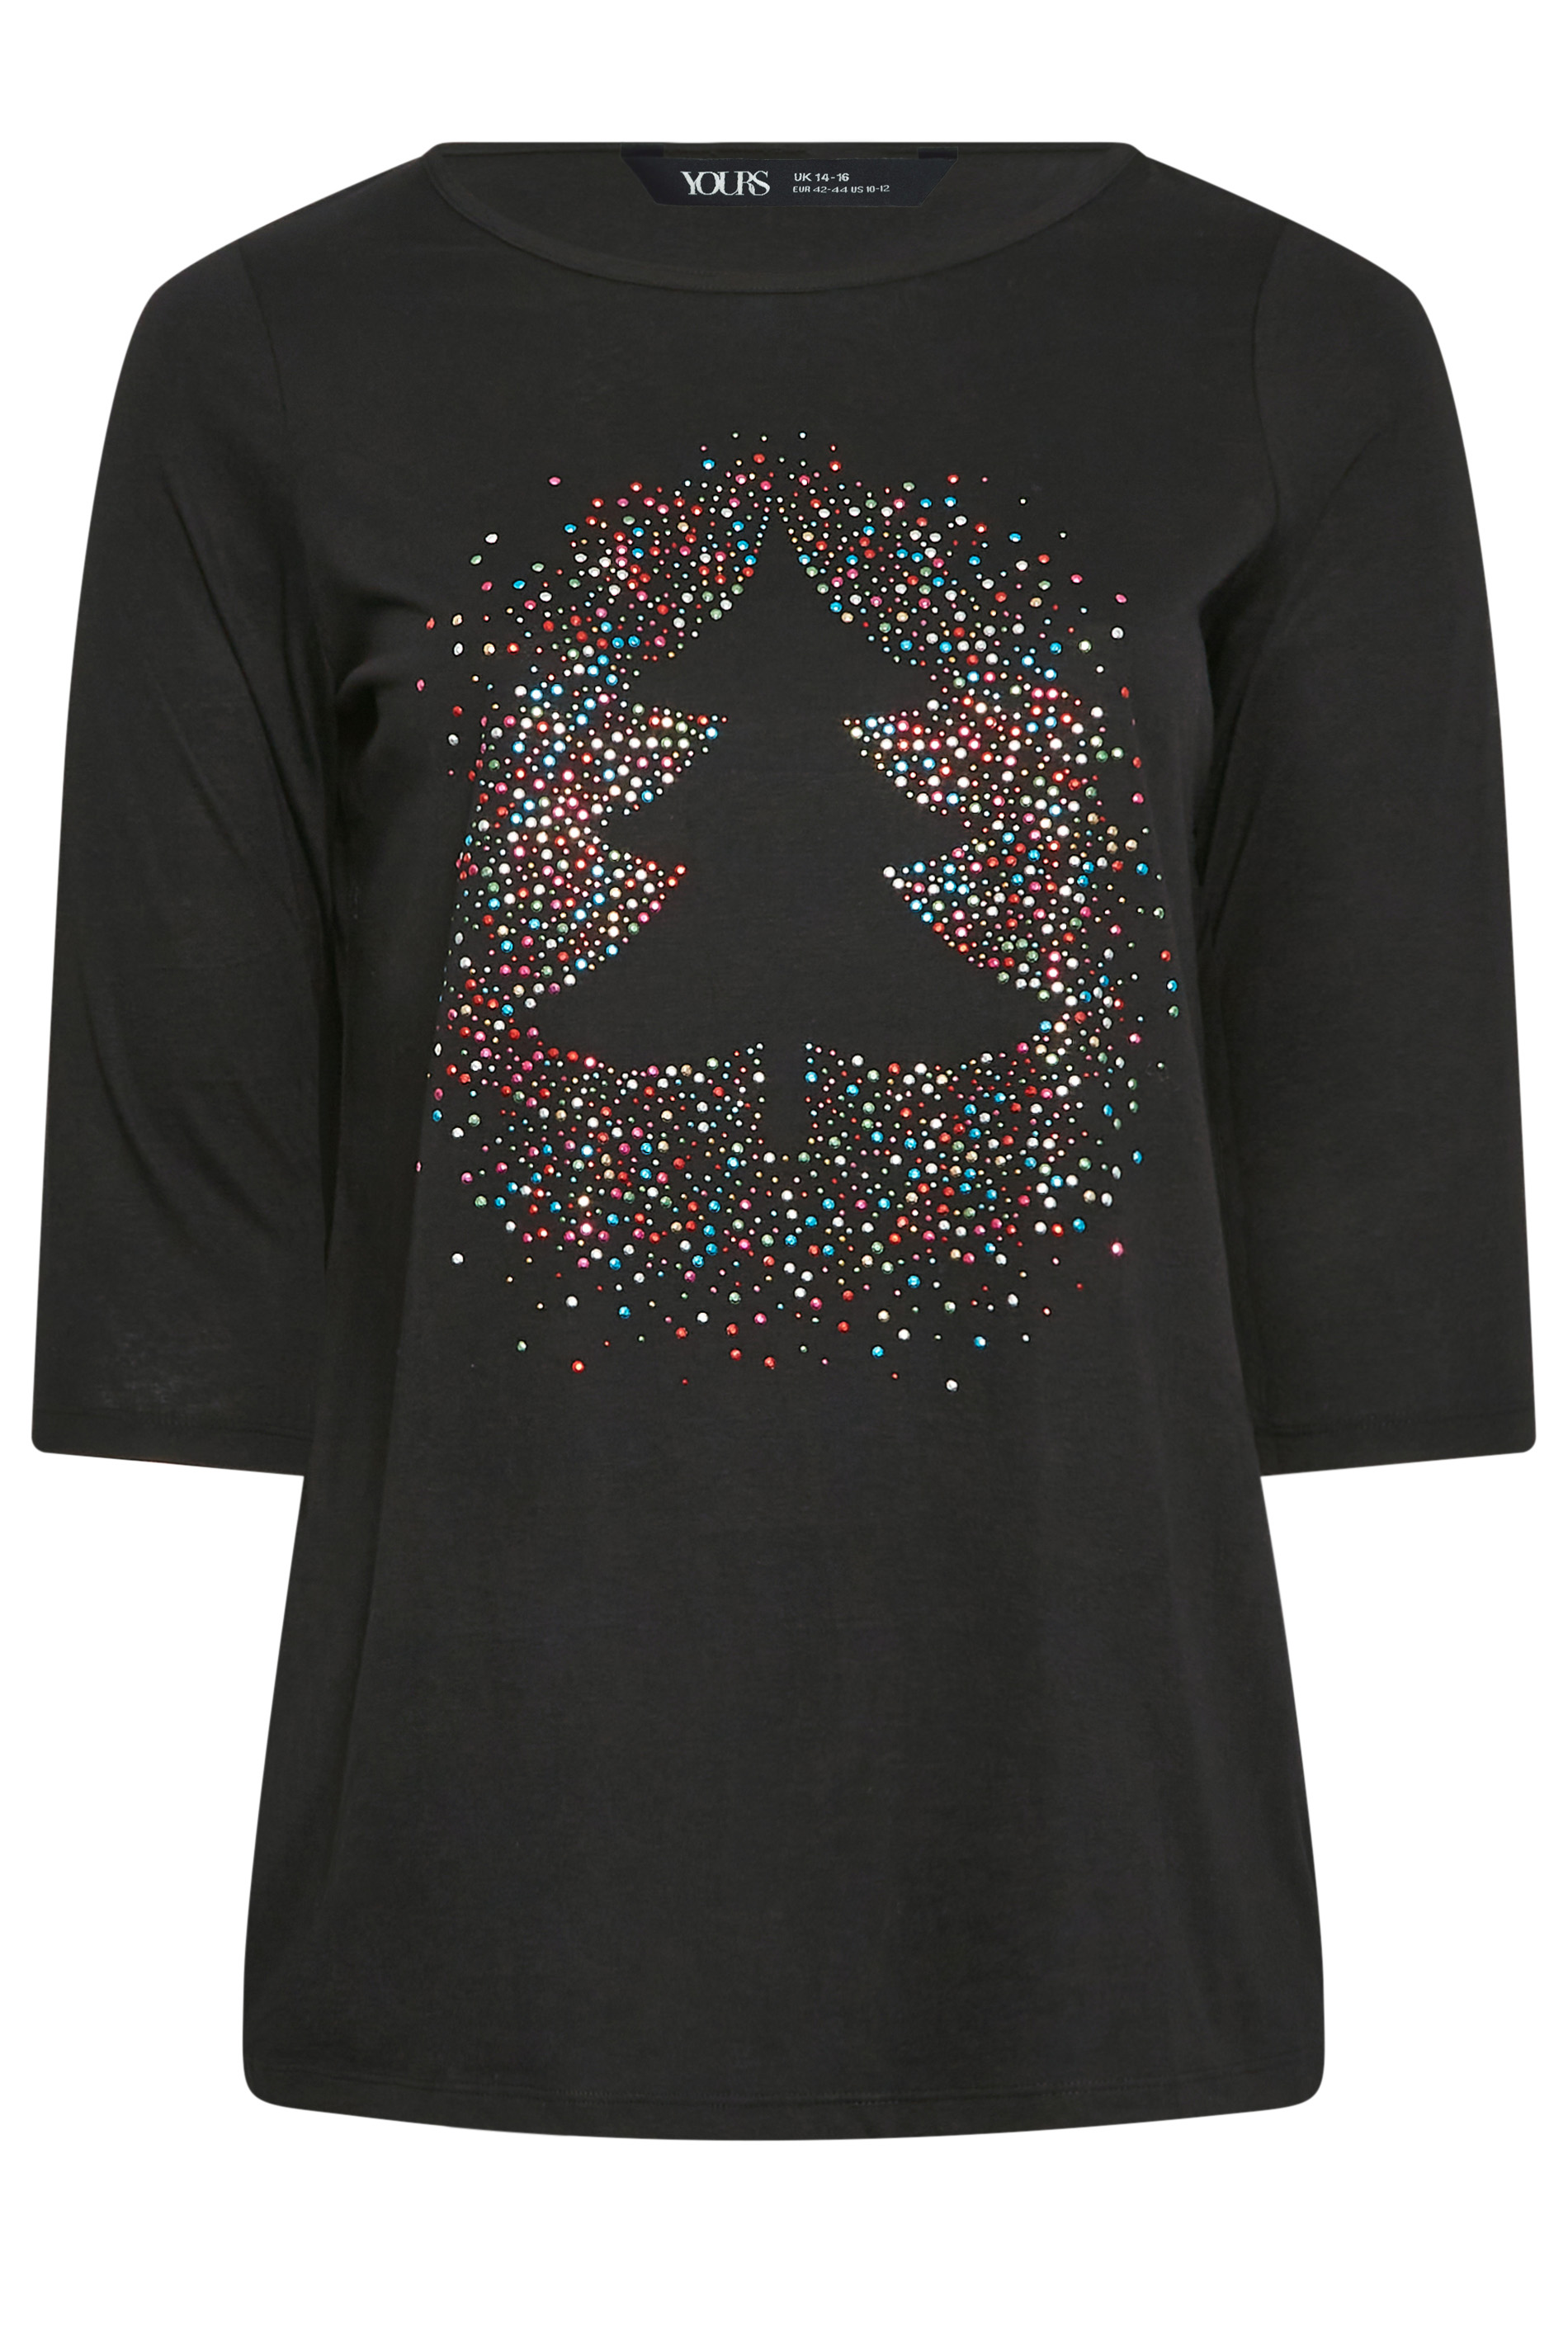 YOURS Plus Size Black Christmas Tree Novelty T-Shirt | Yours Clothing